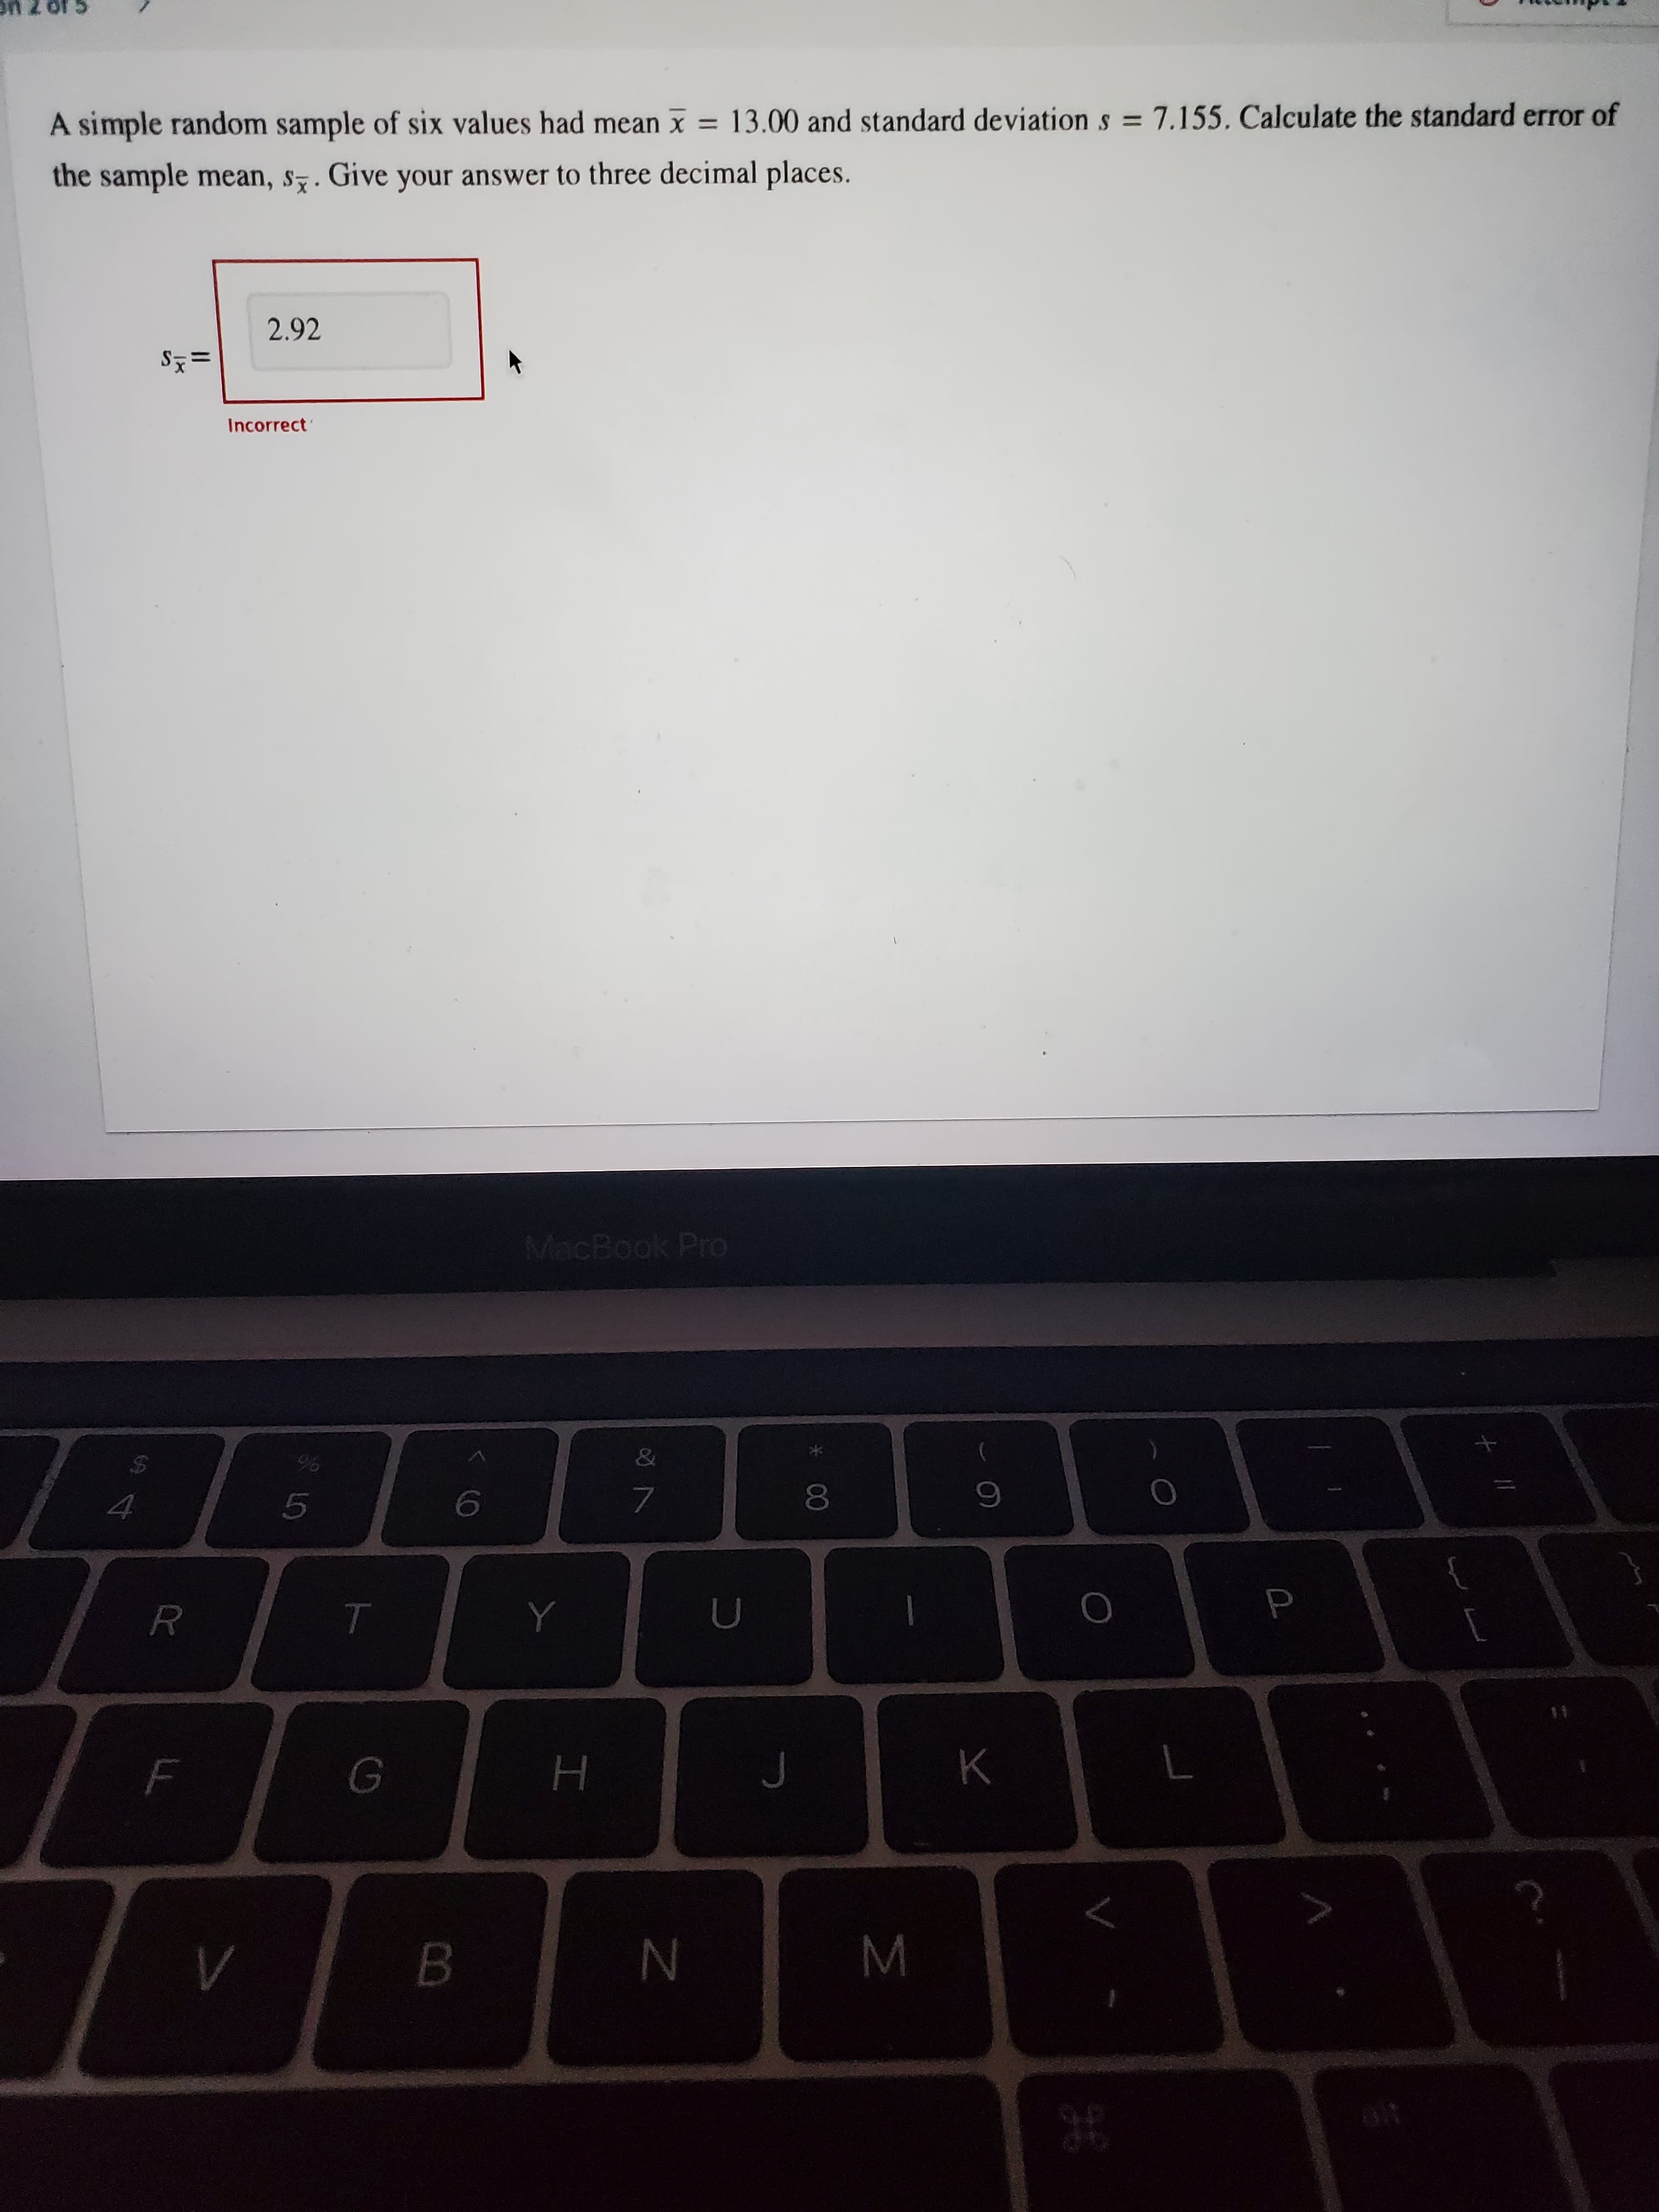 00
A simple random sample of six values had mean x = 13.00 and standard deviation s = 7.155, Calculate the standard error of
%3D
the sample mean, s7. Give your answer to three decimal places.
2.92
='s
Incorrect
MacBook Pro
&
K
B.
